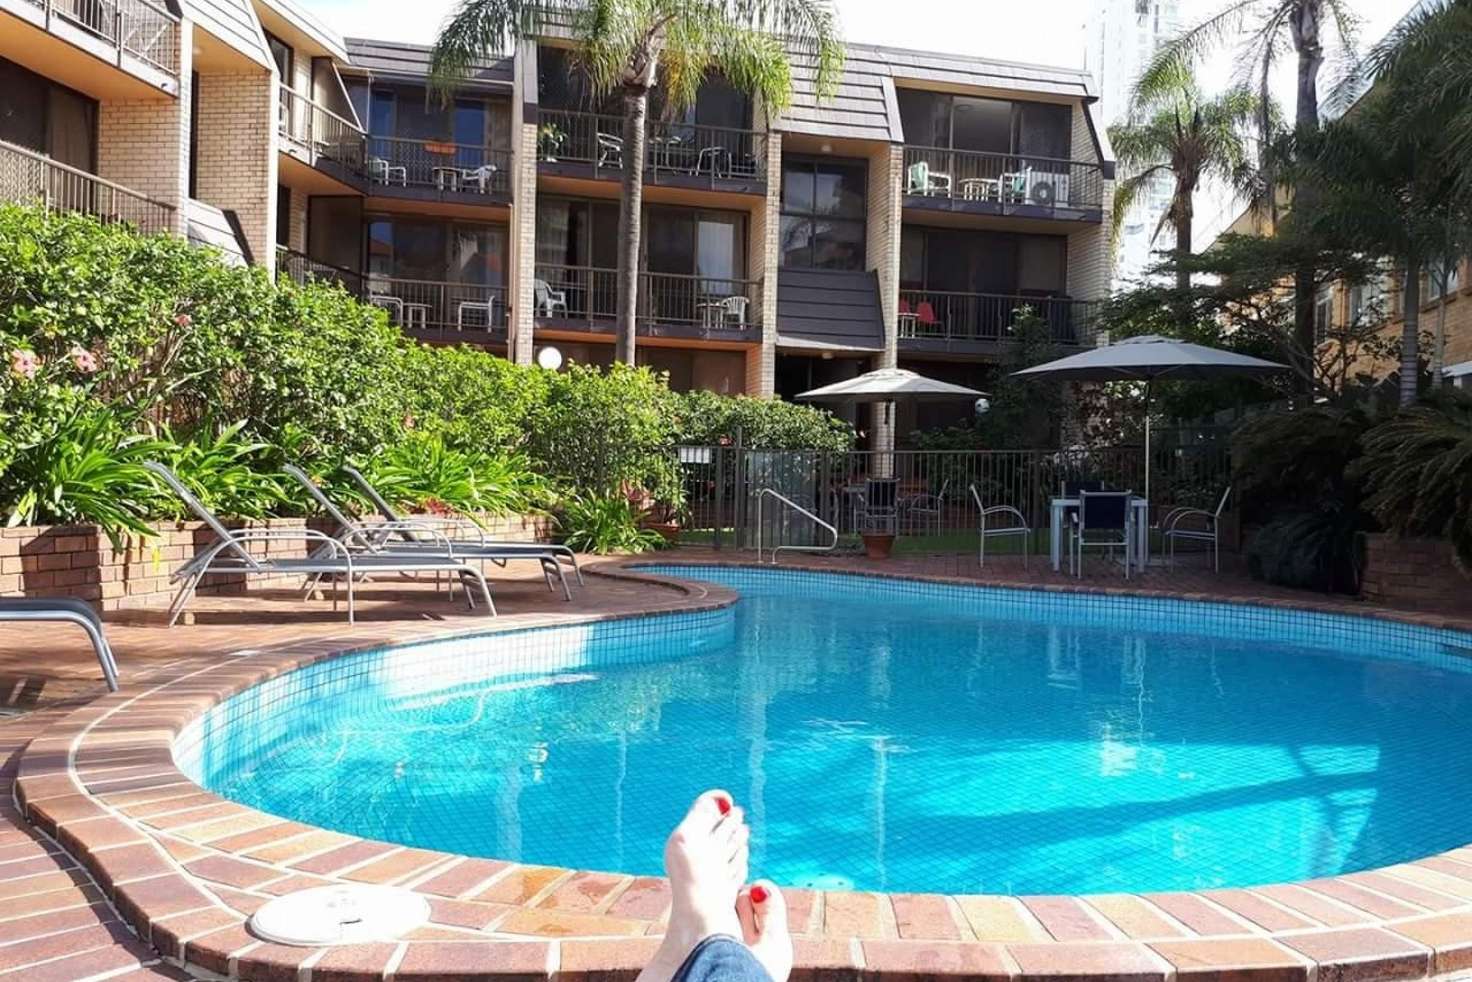 Main view of Homely unit listing, 21-25 Old Burleigh Road, Surfers Paradise QLD 4217